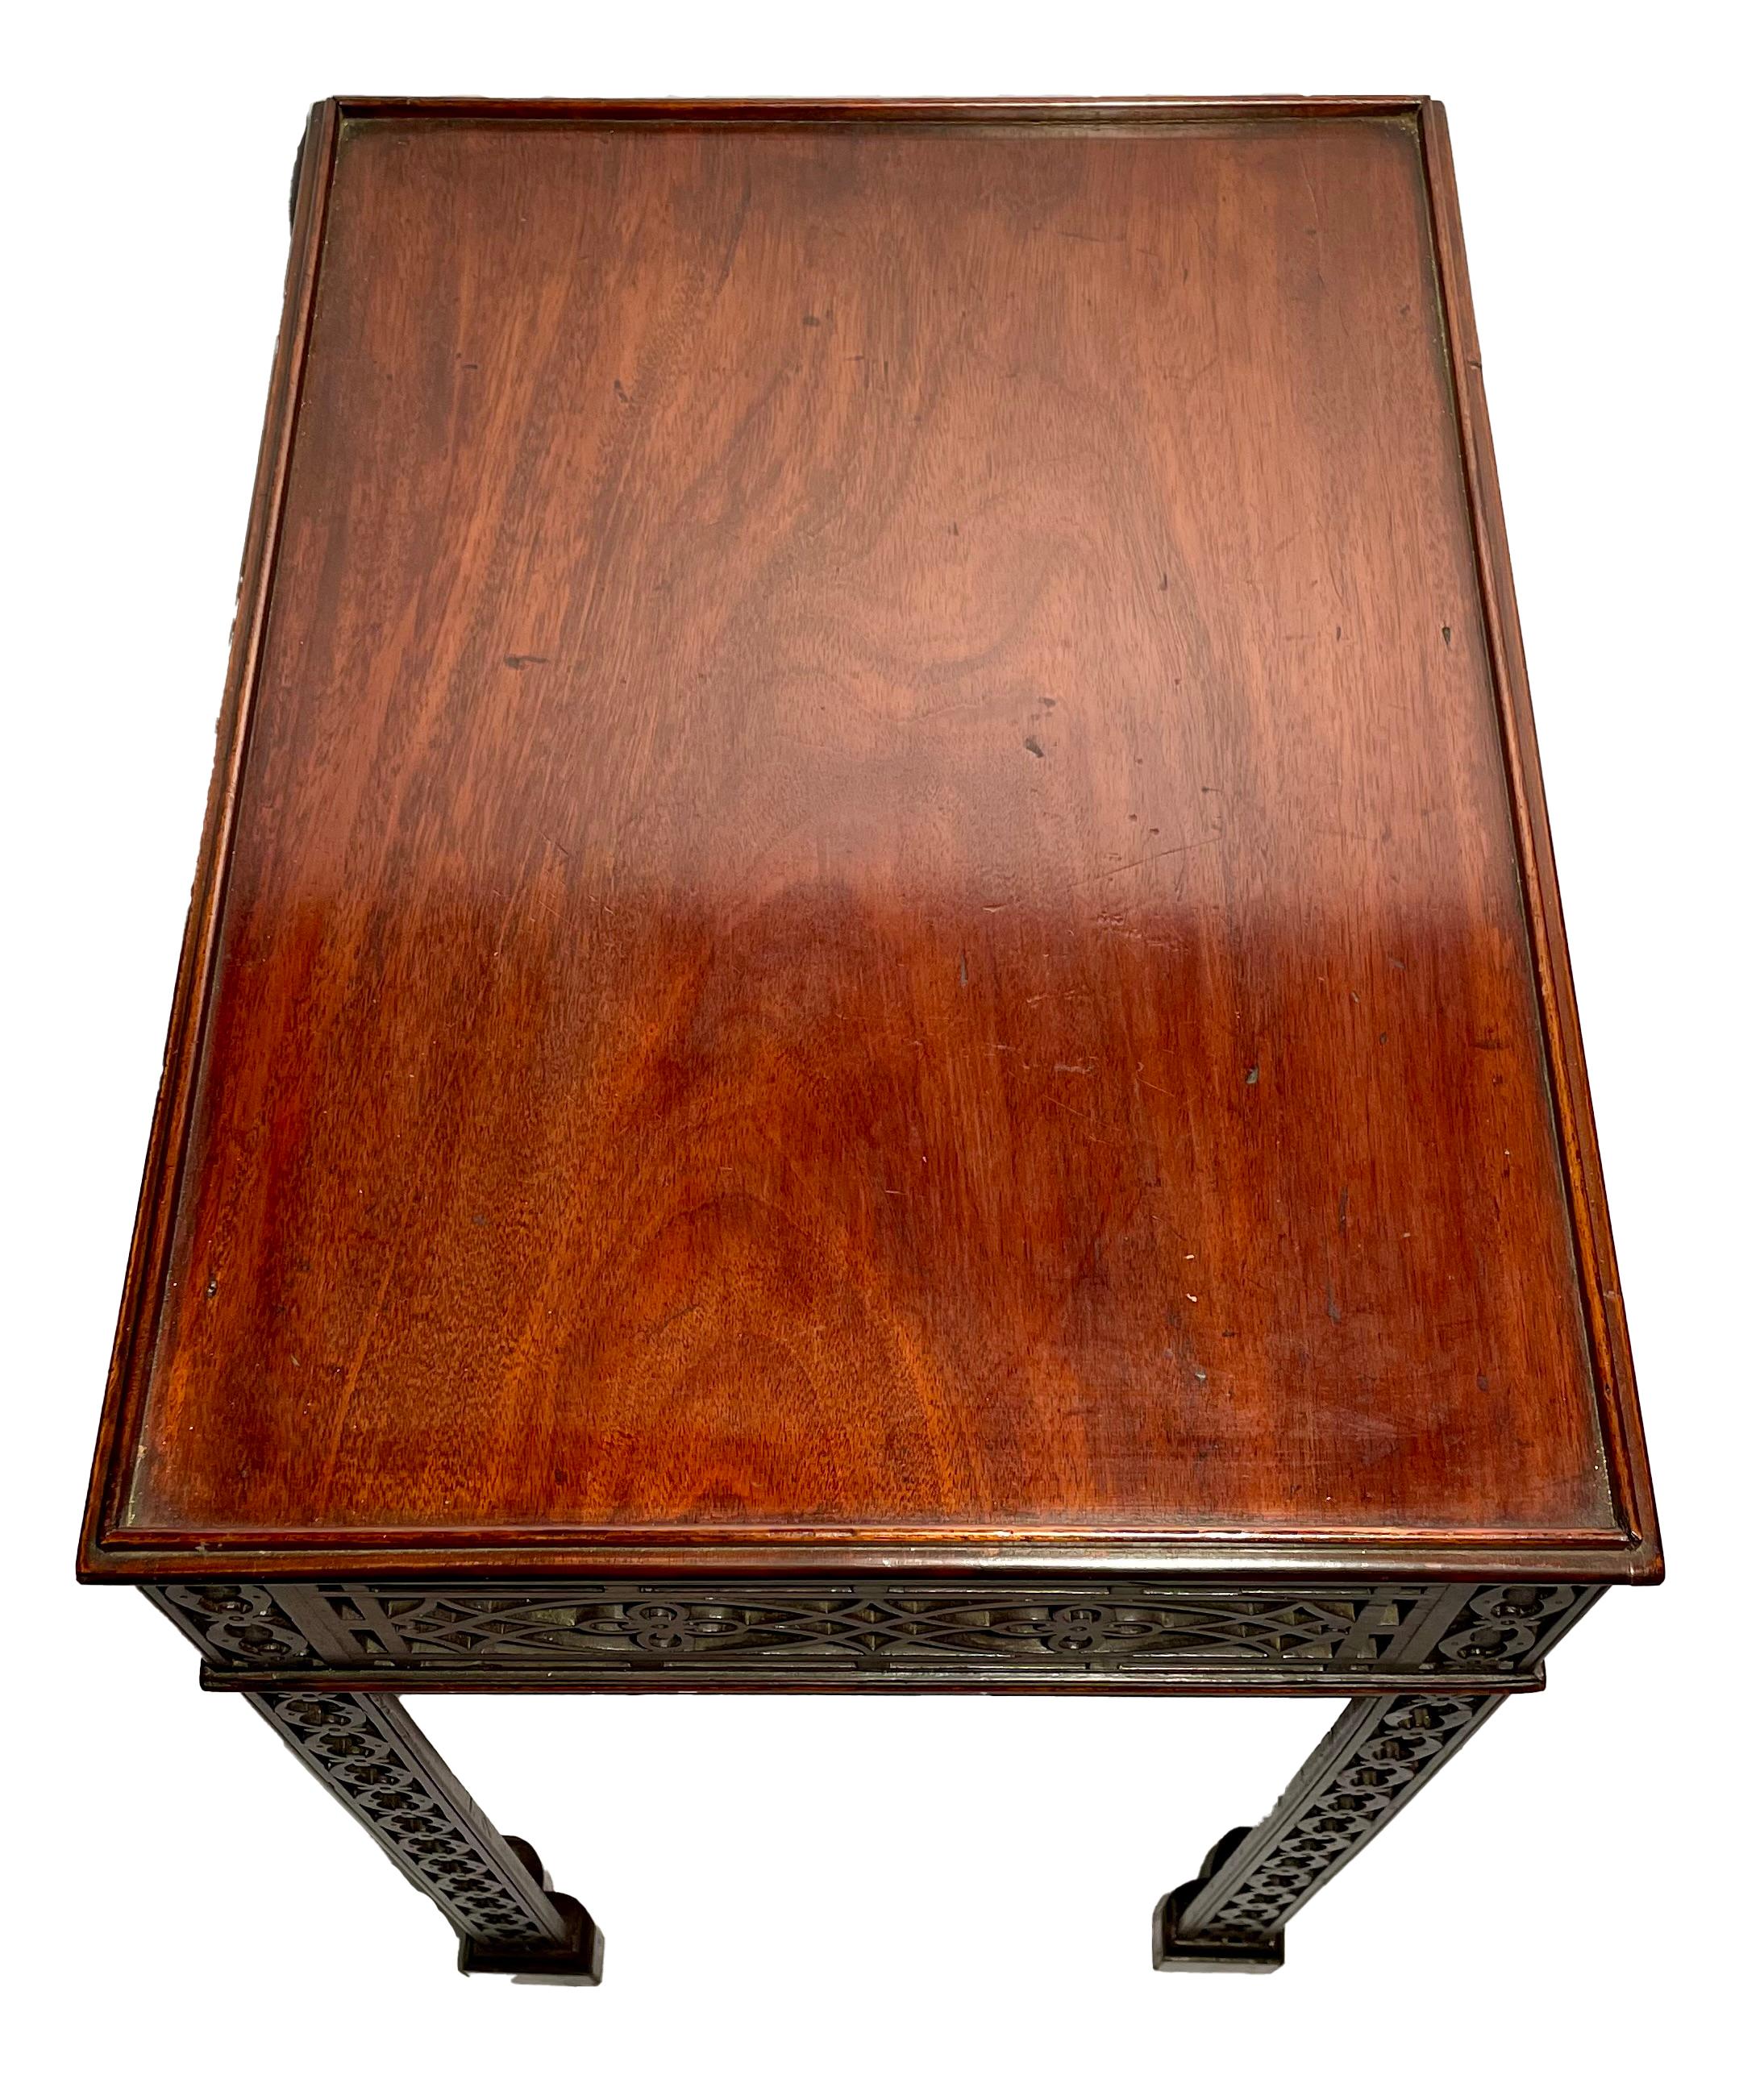 Antique English Mahogany Tea Table with Chippendale Fretwork, Circa 1880. For Sale 3